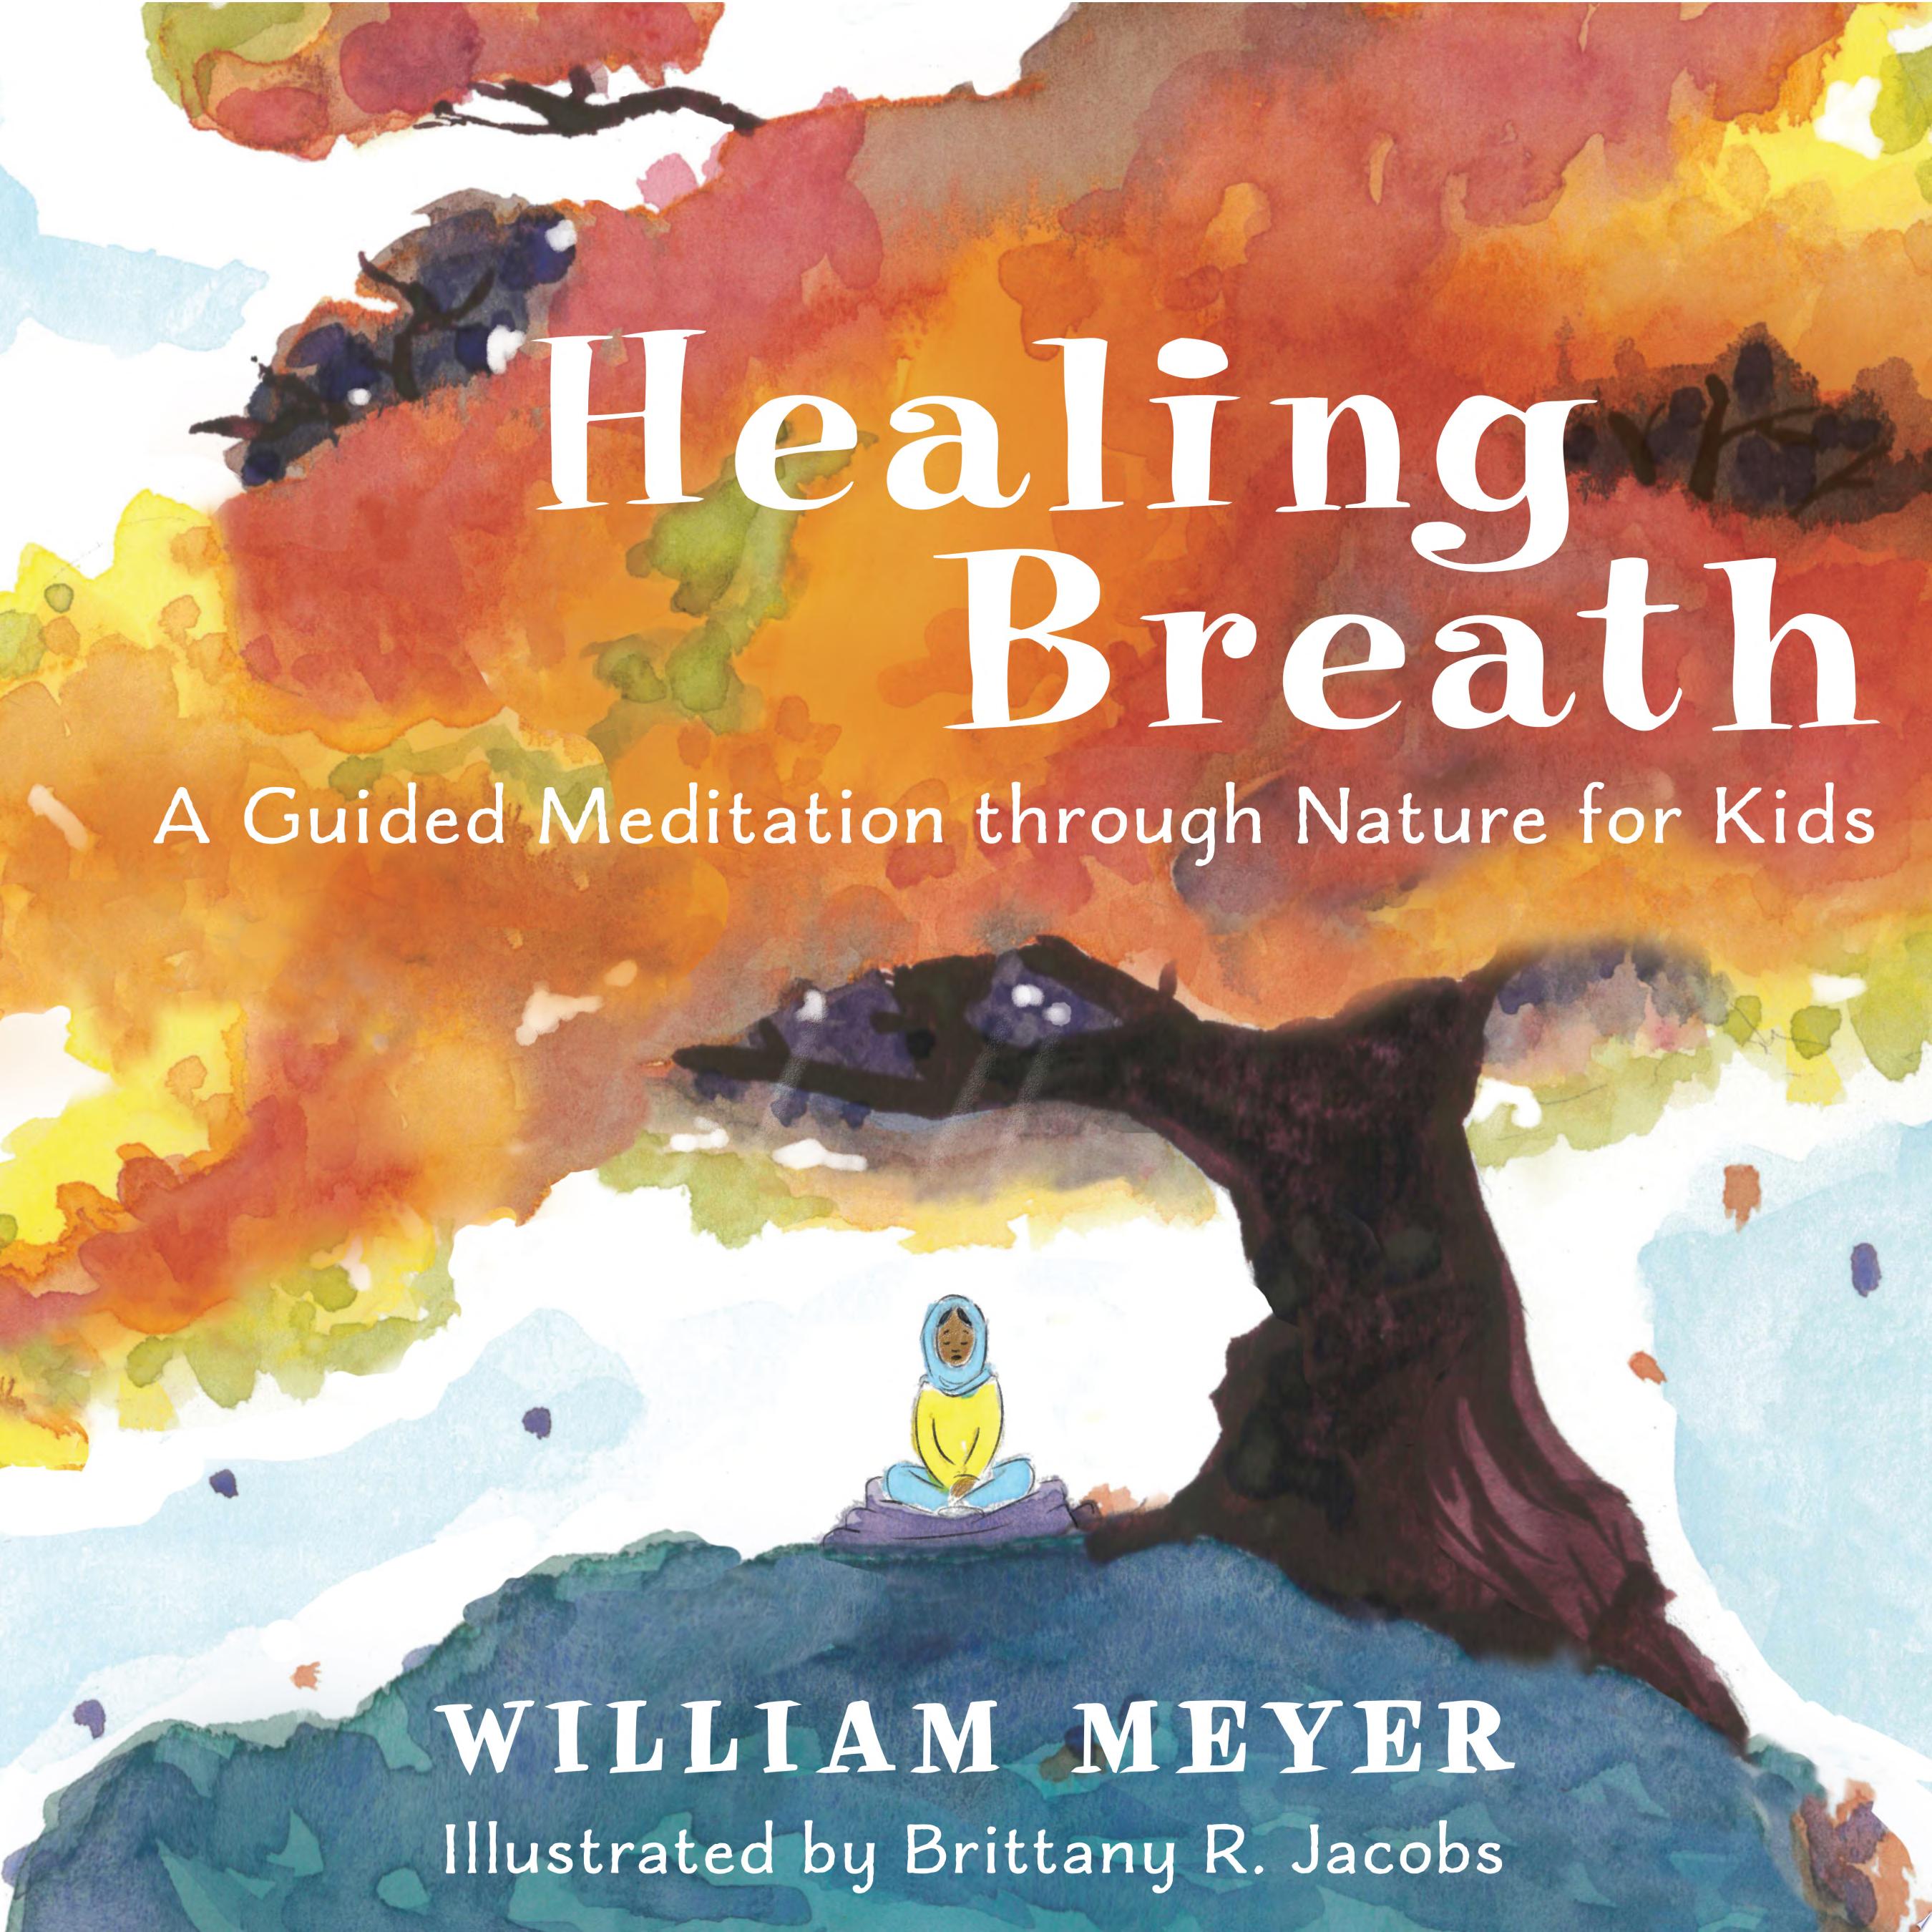 Image for "Healing Breath"